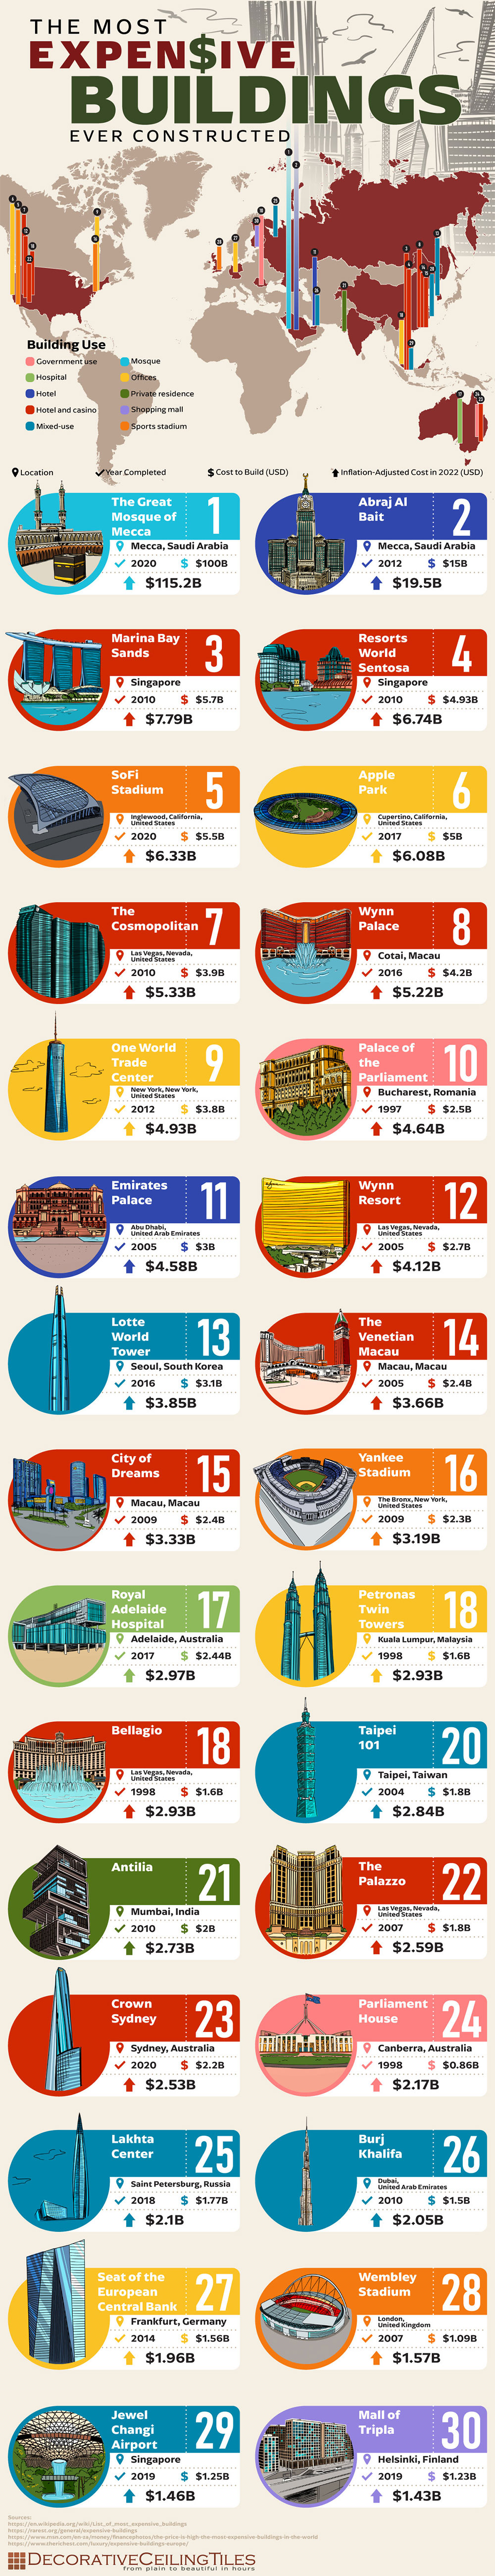 The World's Most Expensive Buildings and Their Cost